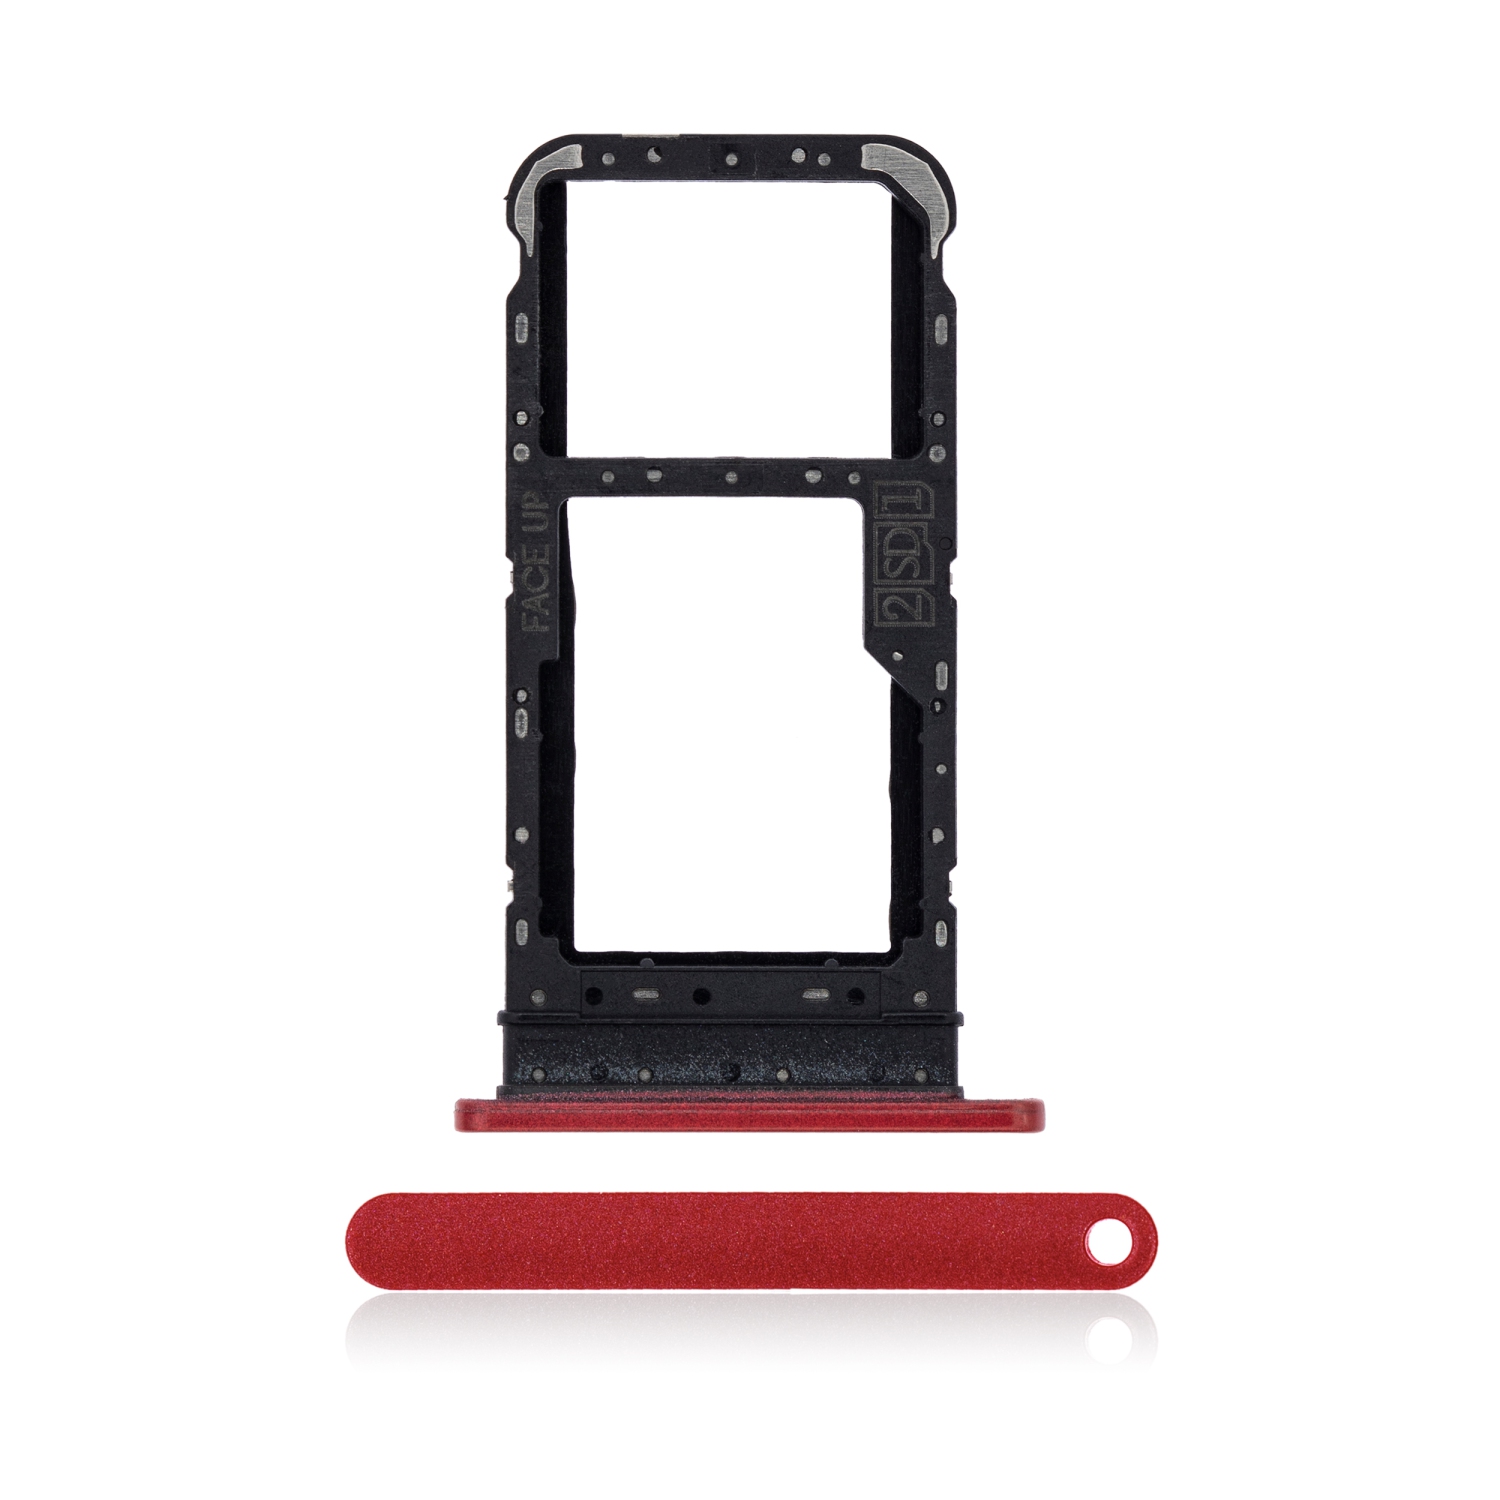 Replacement Single Sim Card Tray Compatible For Motorola Moto E7 (XT2095 / 2020) (Red)